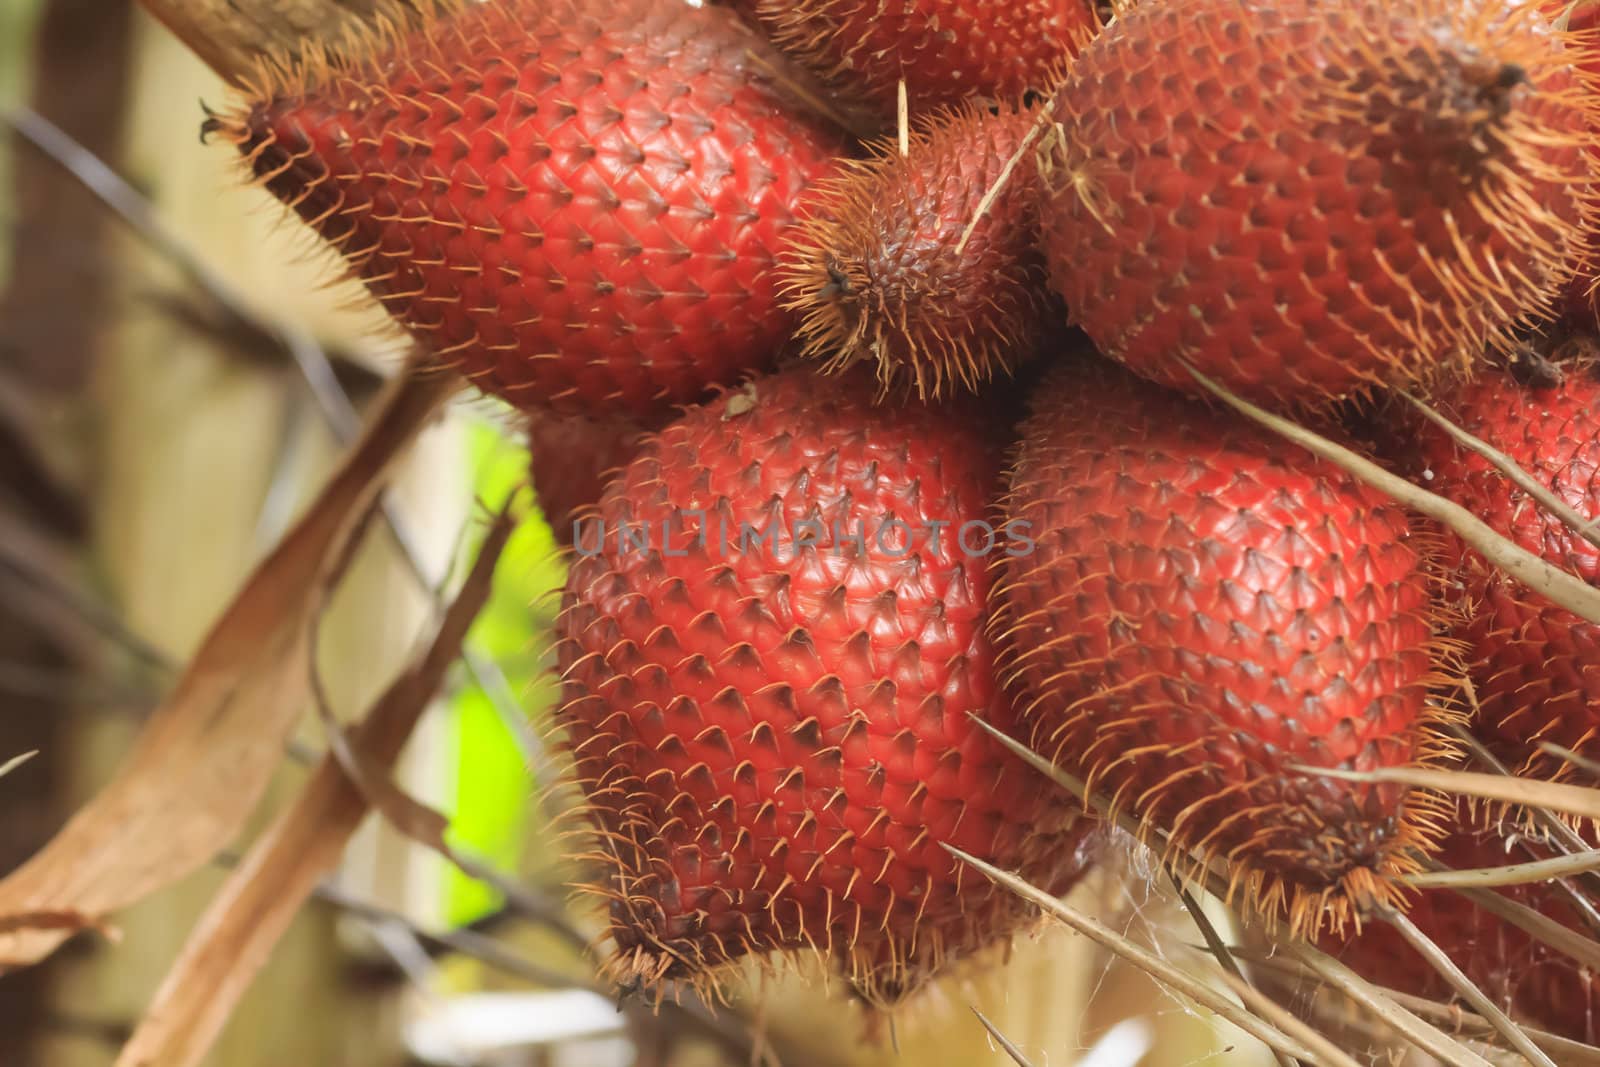 Zalacca (tropical fruit) on sales in the Thai market